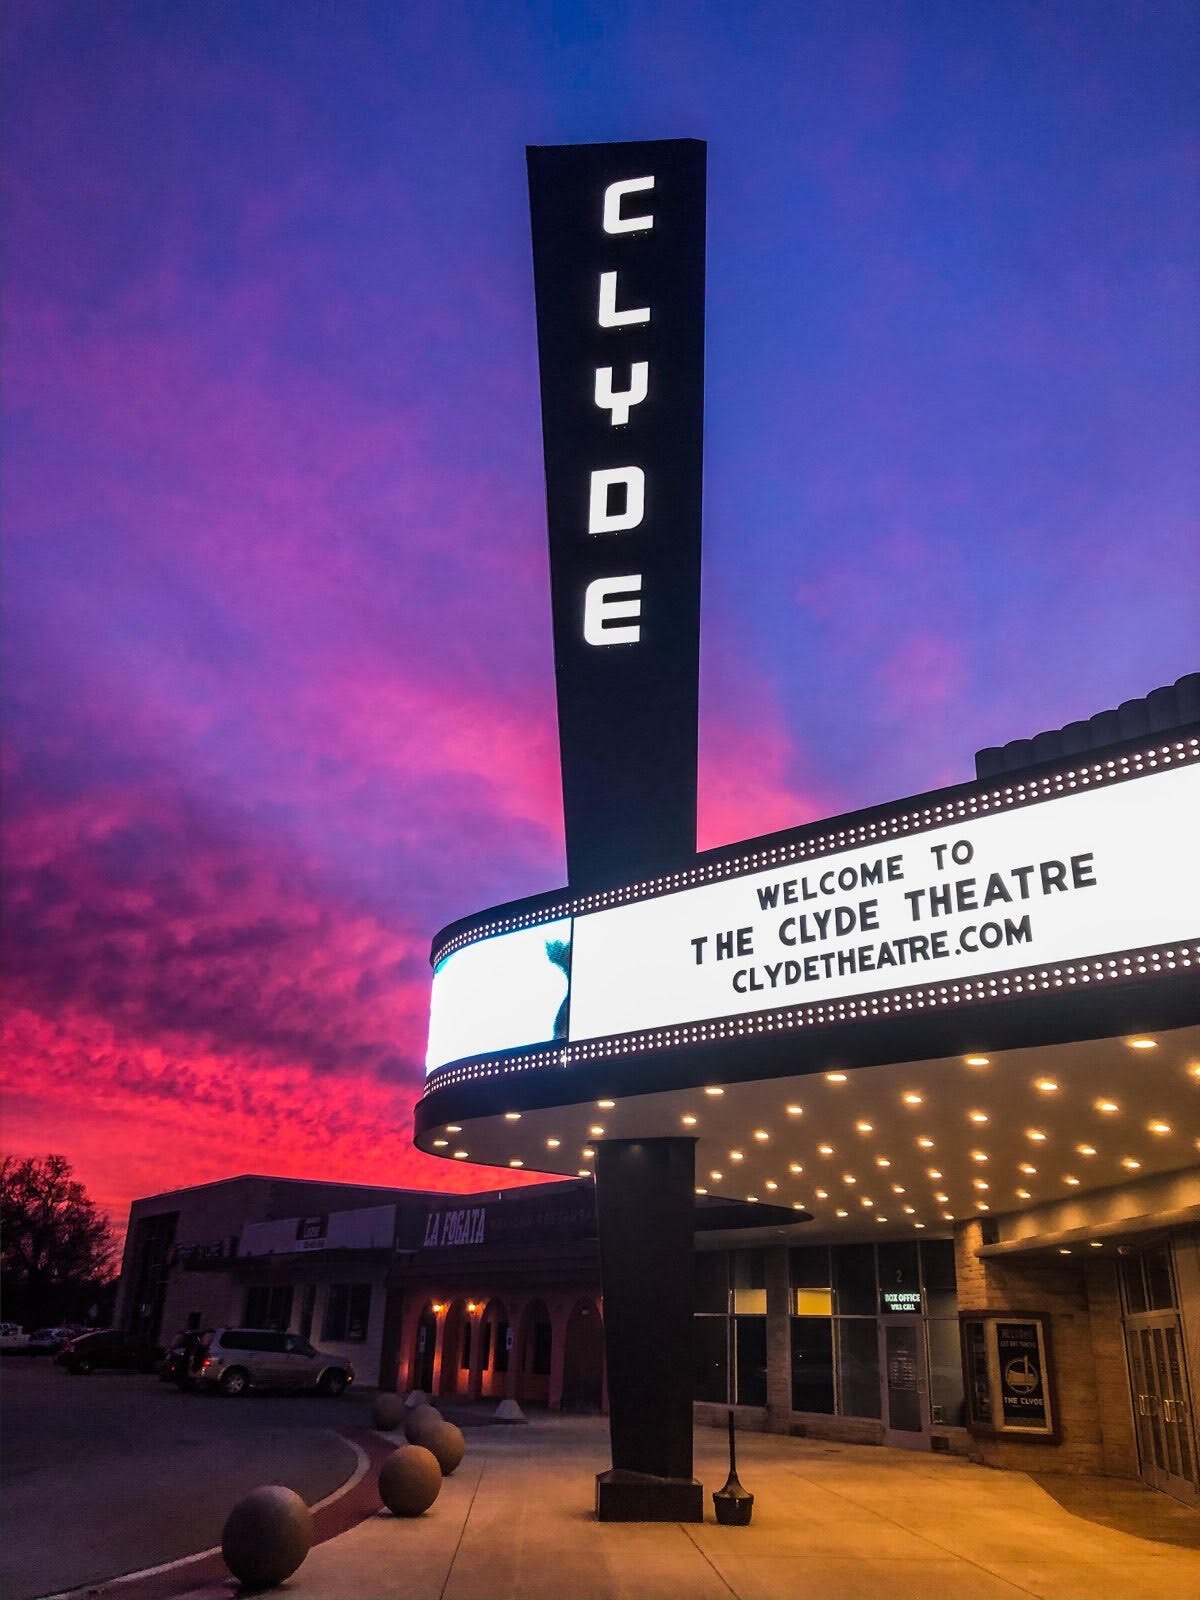 The Clyde Theatre hosts live events and concerts, featuring internationally renowned artists.